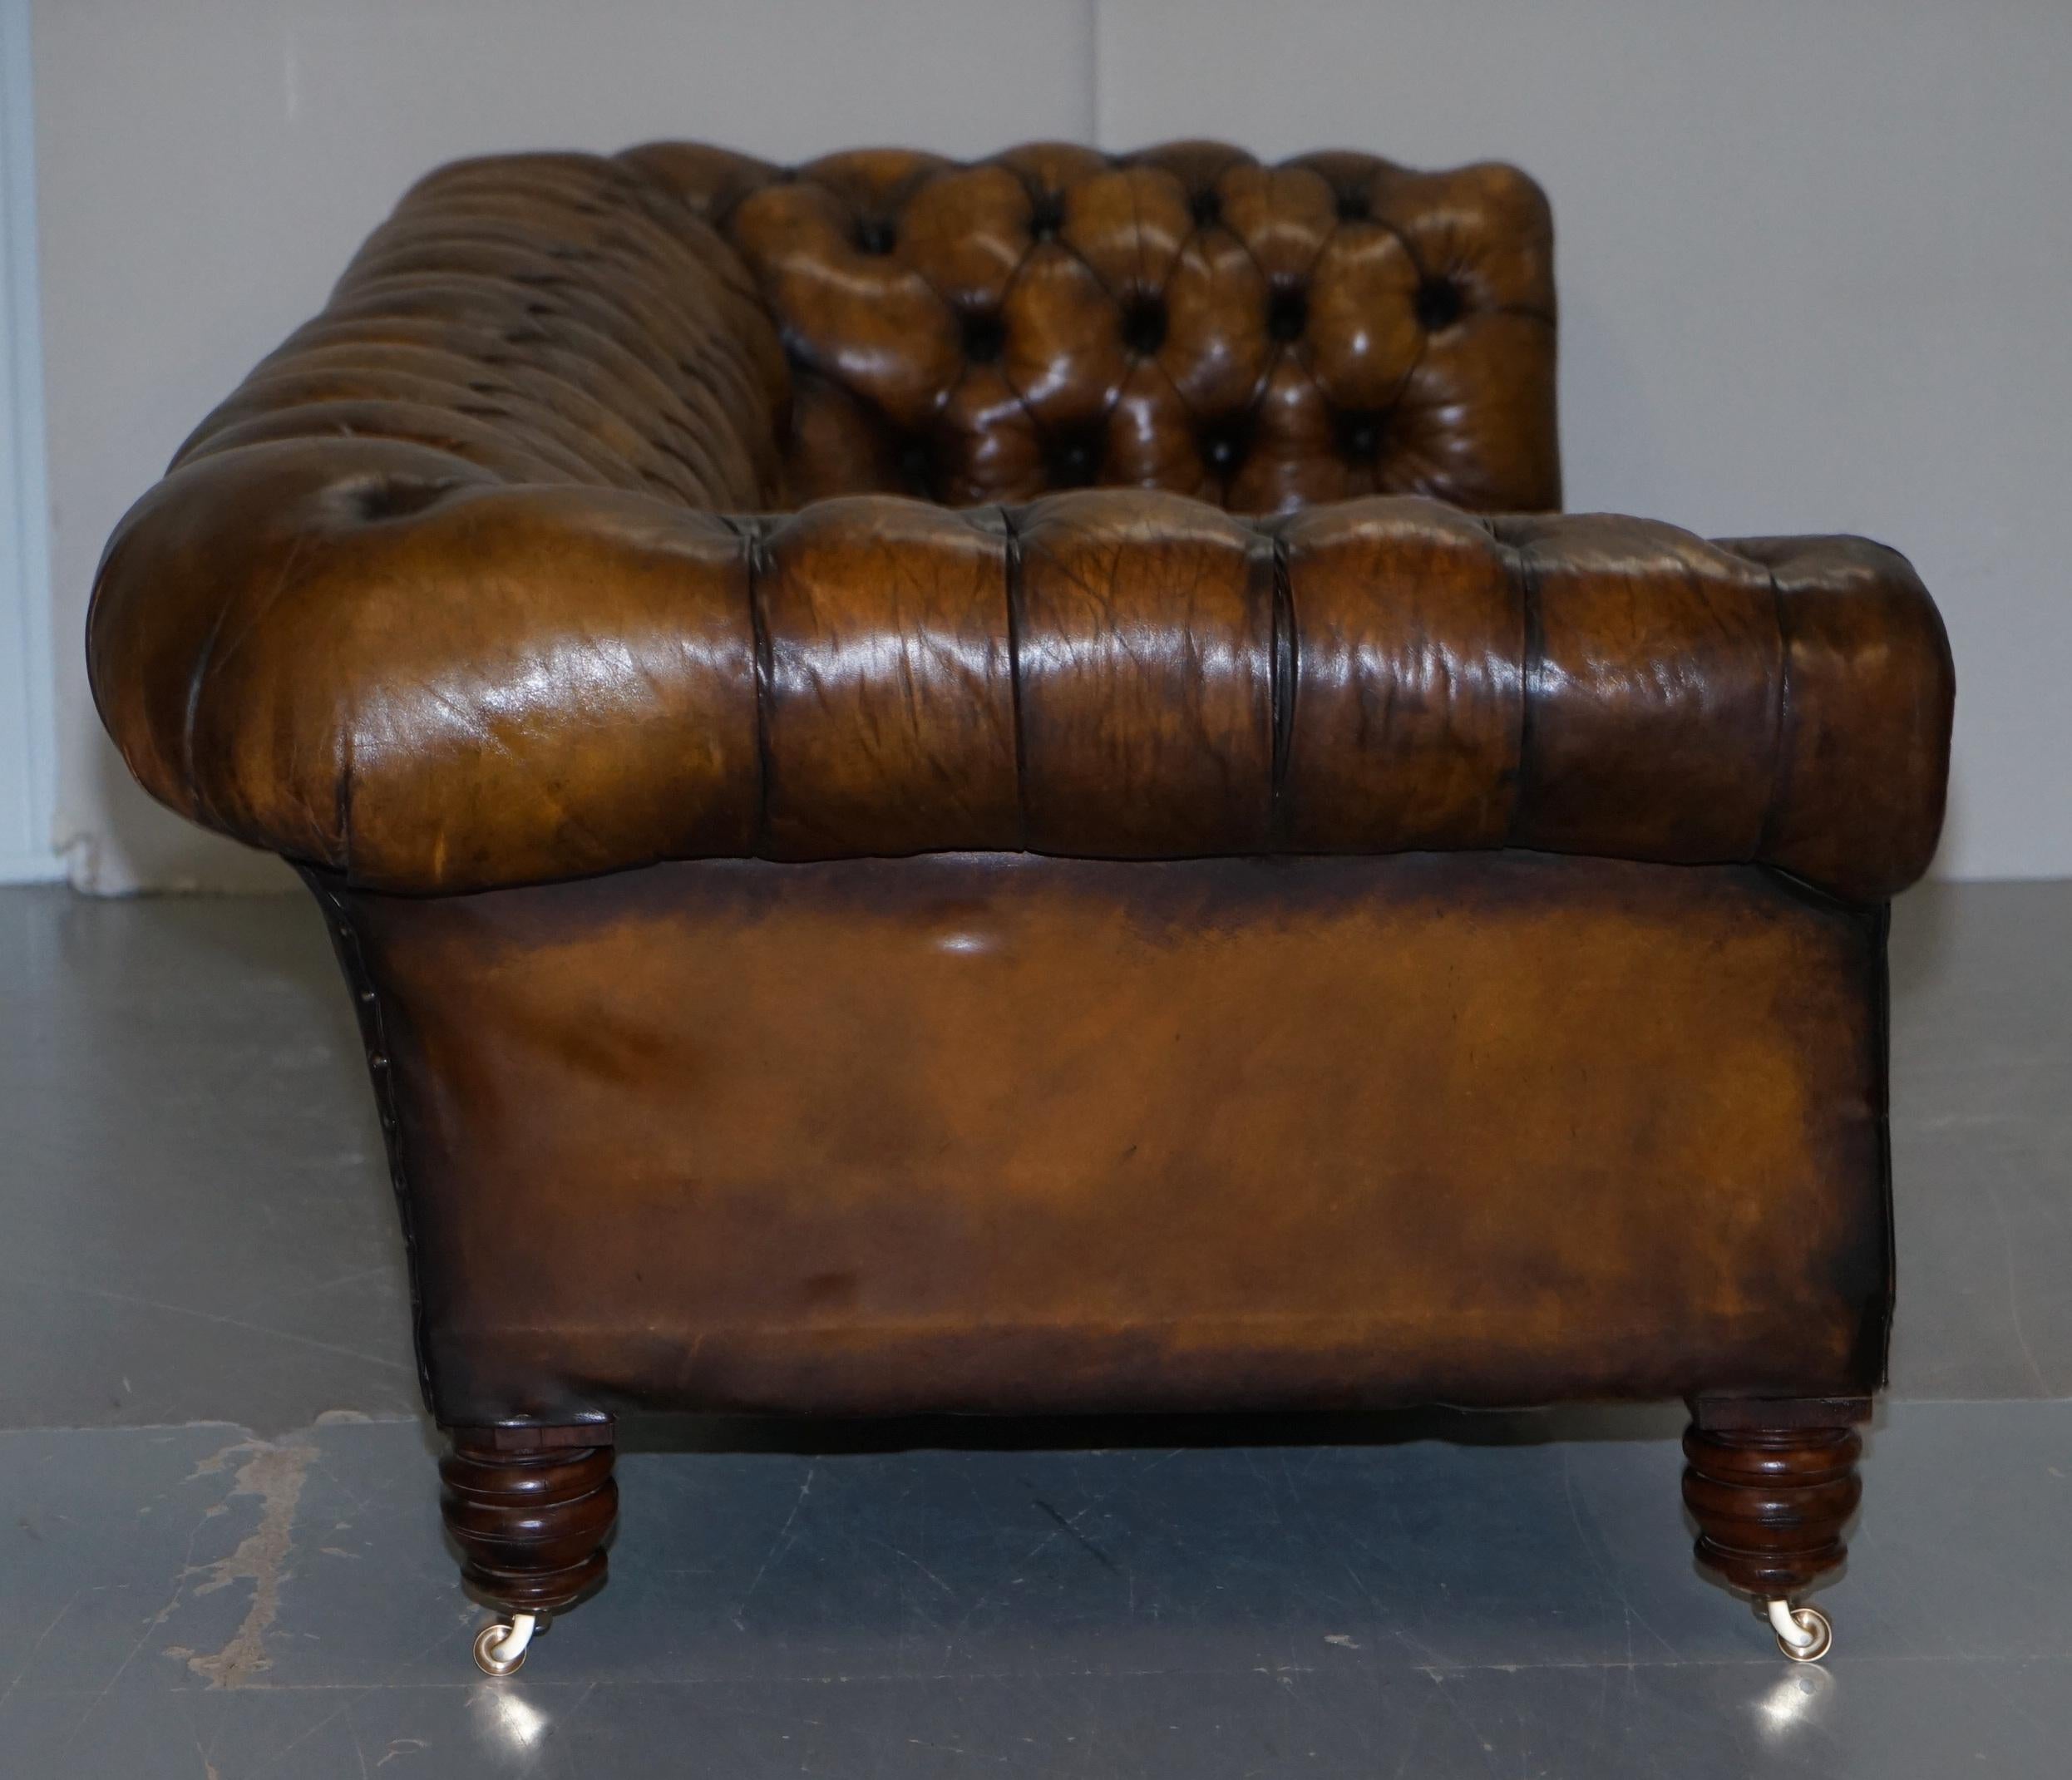 Huge Restored Victorian Chesterfield Brown Leather Sofa Horse Hair Coil Sprung 9